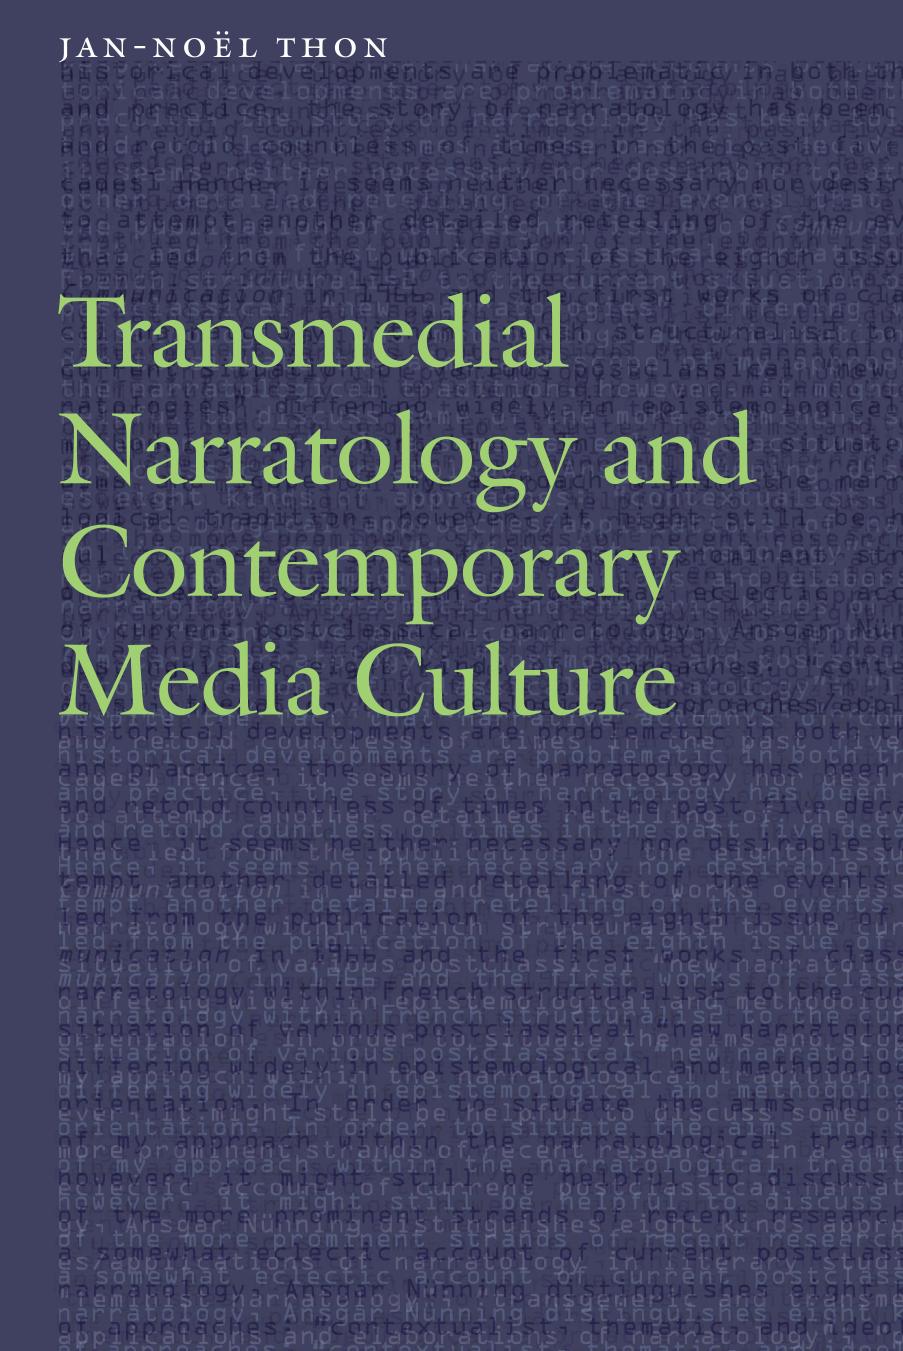 Transmedial Narratology and Contemporary Media Culture by Jan-Noël Thon